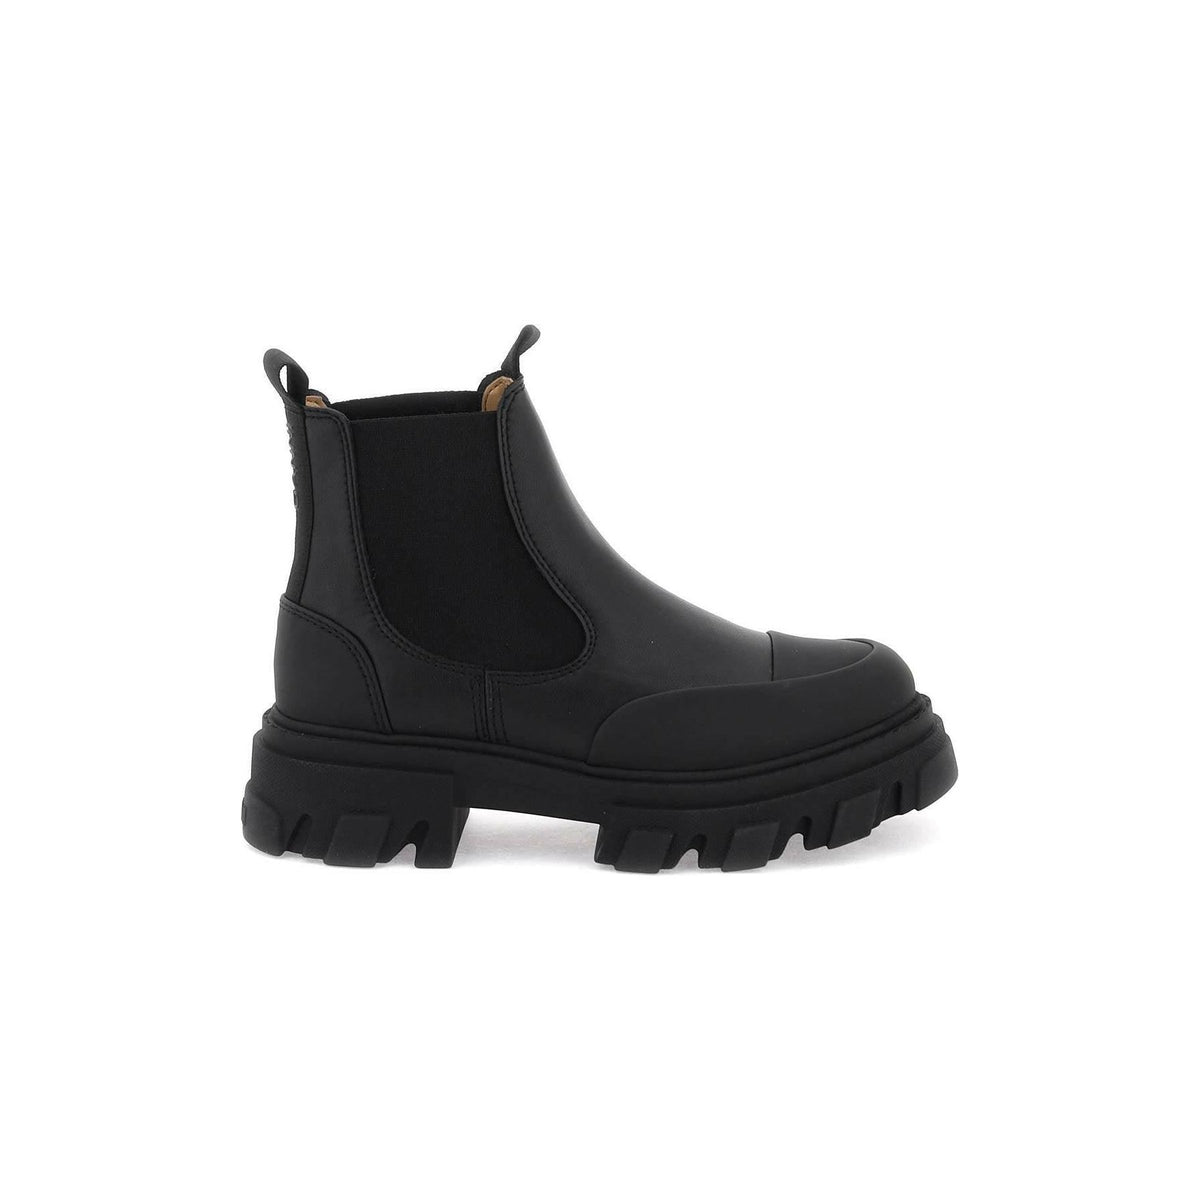 Black Stitch Cleated Low Chelsea Ankle Boots GANNI JOHN JULIA.